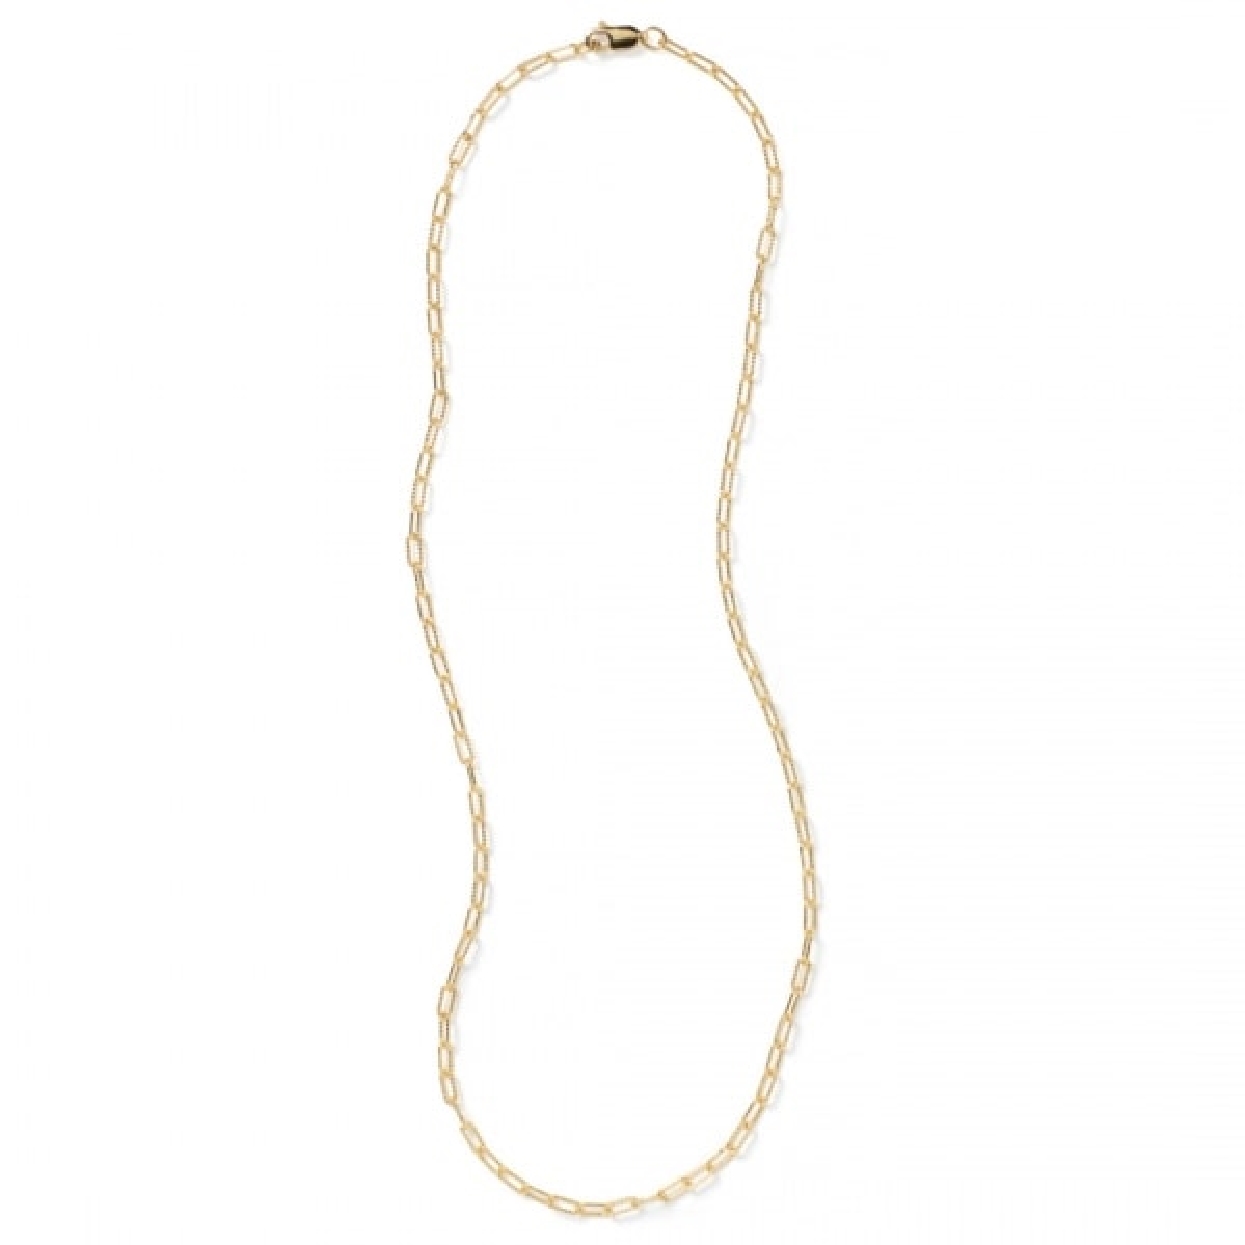 Southern Gates Gold Filled Textured Paperclip Necklace 18 Inches